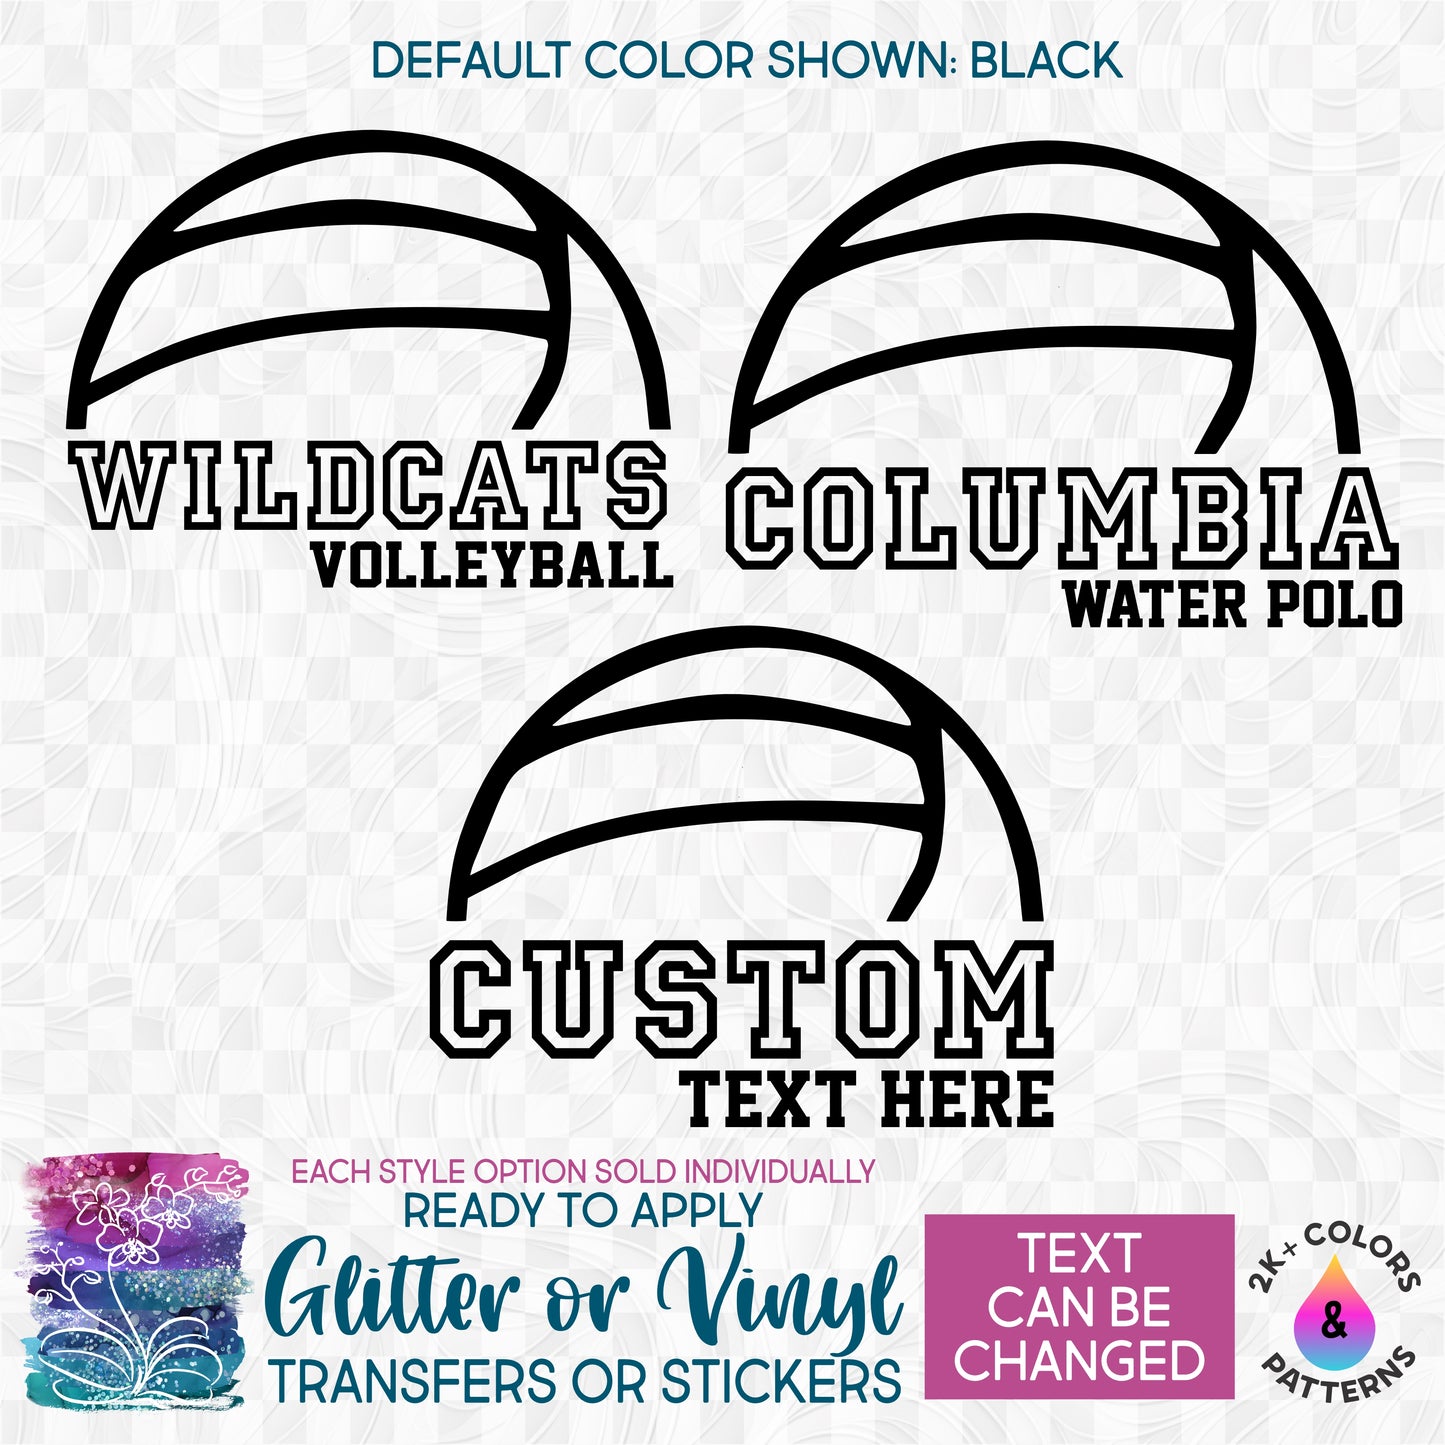 (s054-8B) Volleyball Waterpolo Team Name Glitter or Vinyl Iron-On Transfer or Sticker